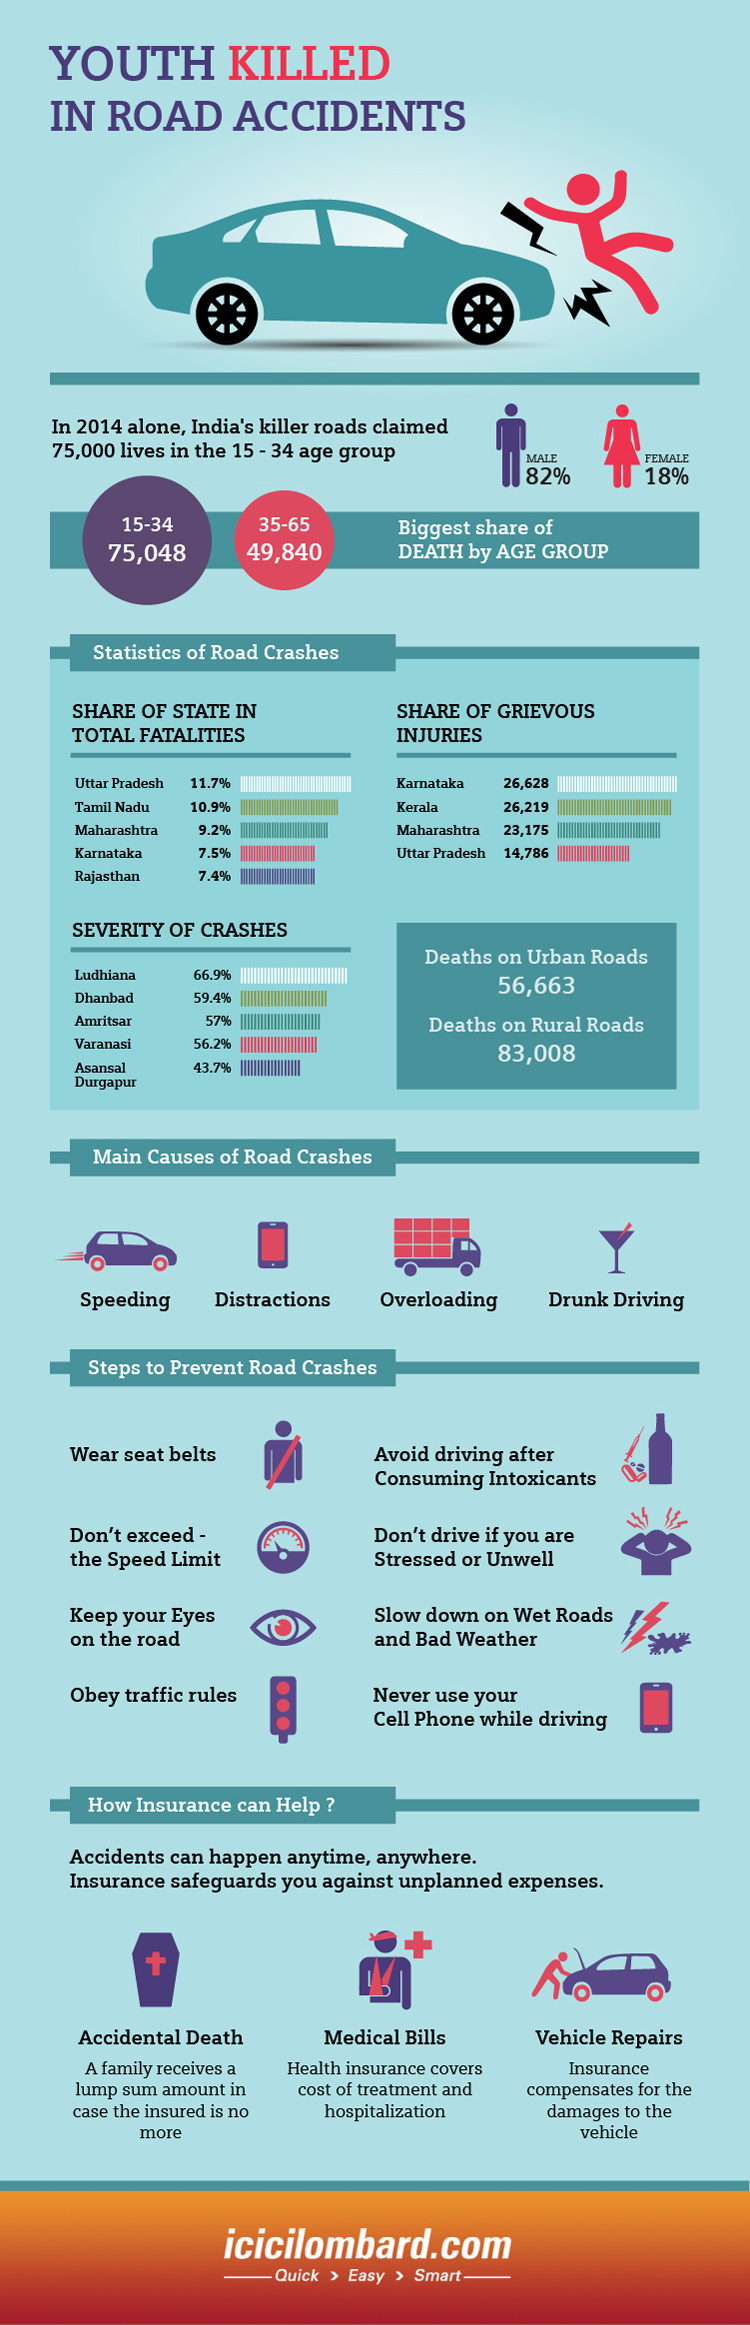 20151014-youth-killed-in-road-accidents